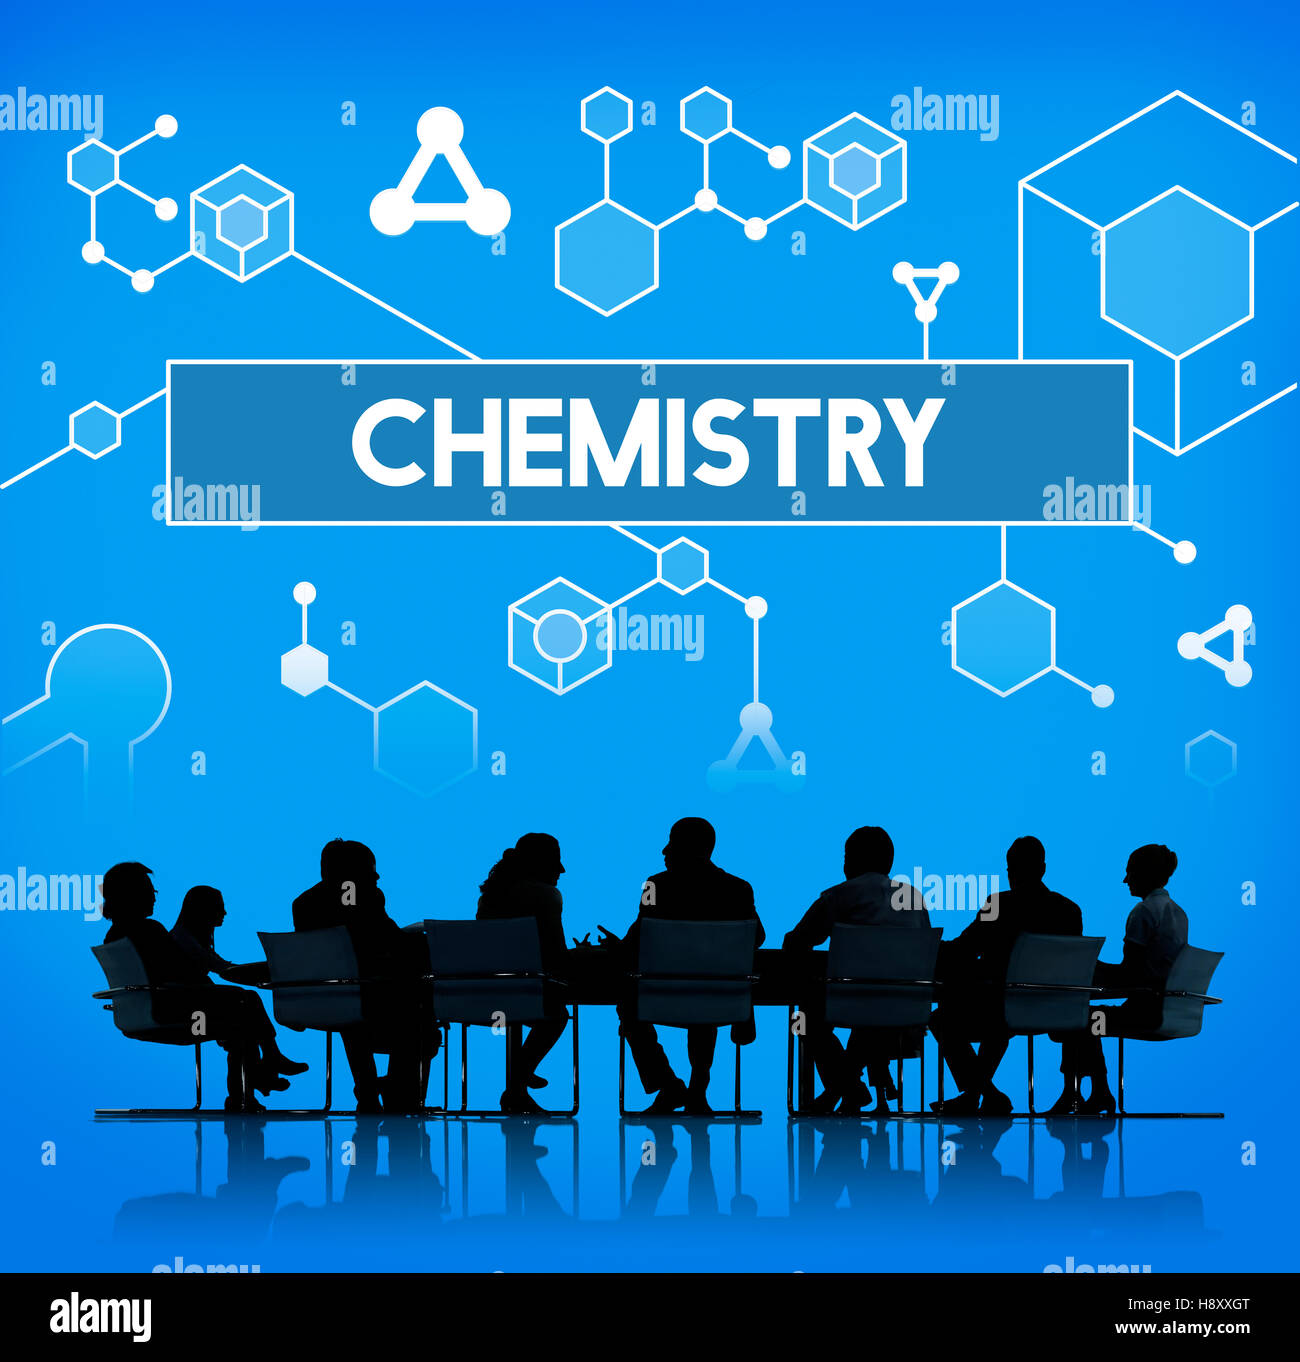 Chemistry Science Research Subject Education Concept Stock Photo